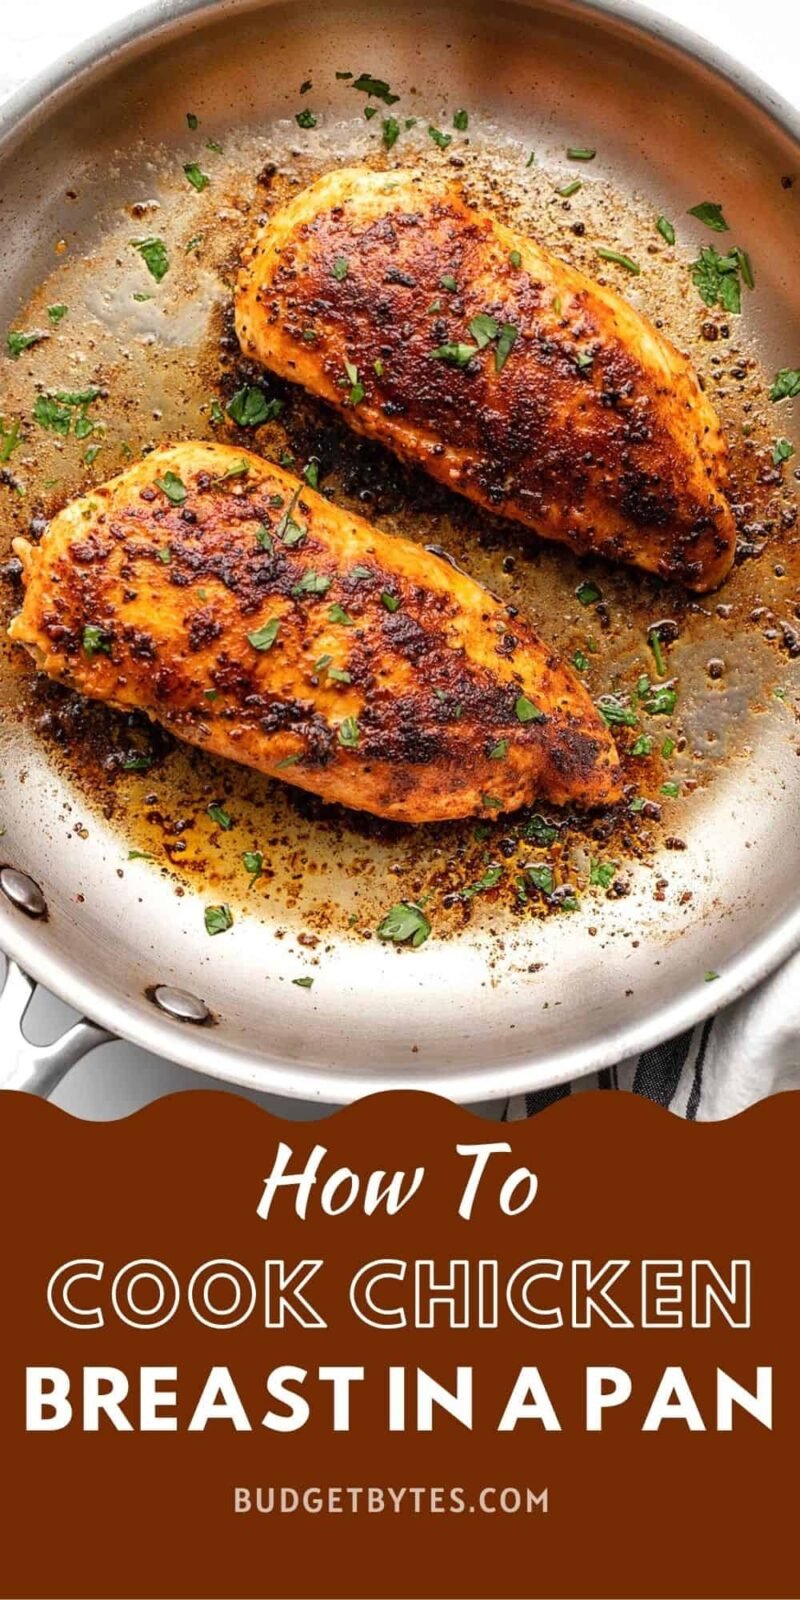 Cooked chicken breast in a skillet, title text at the bottom